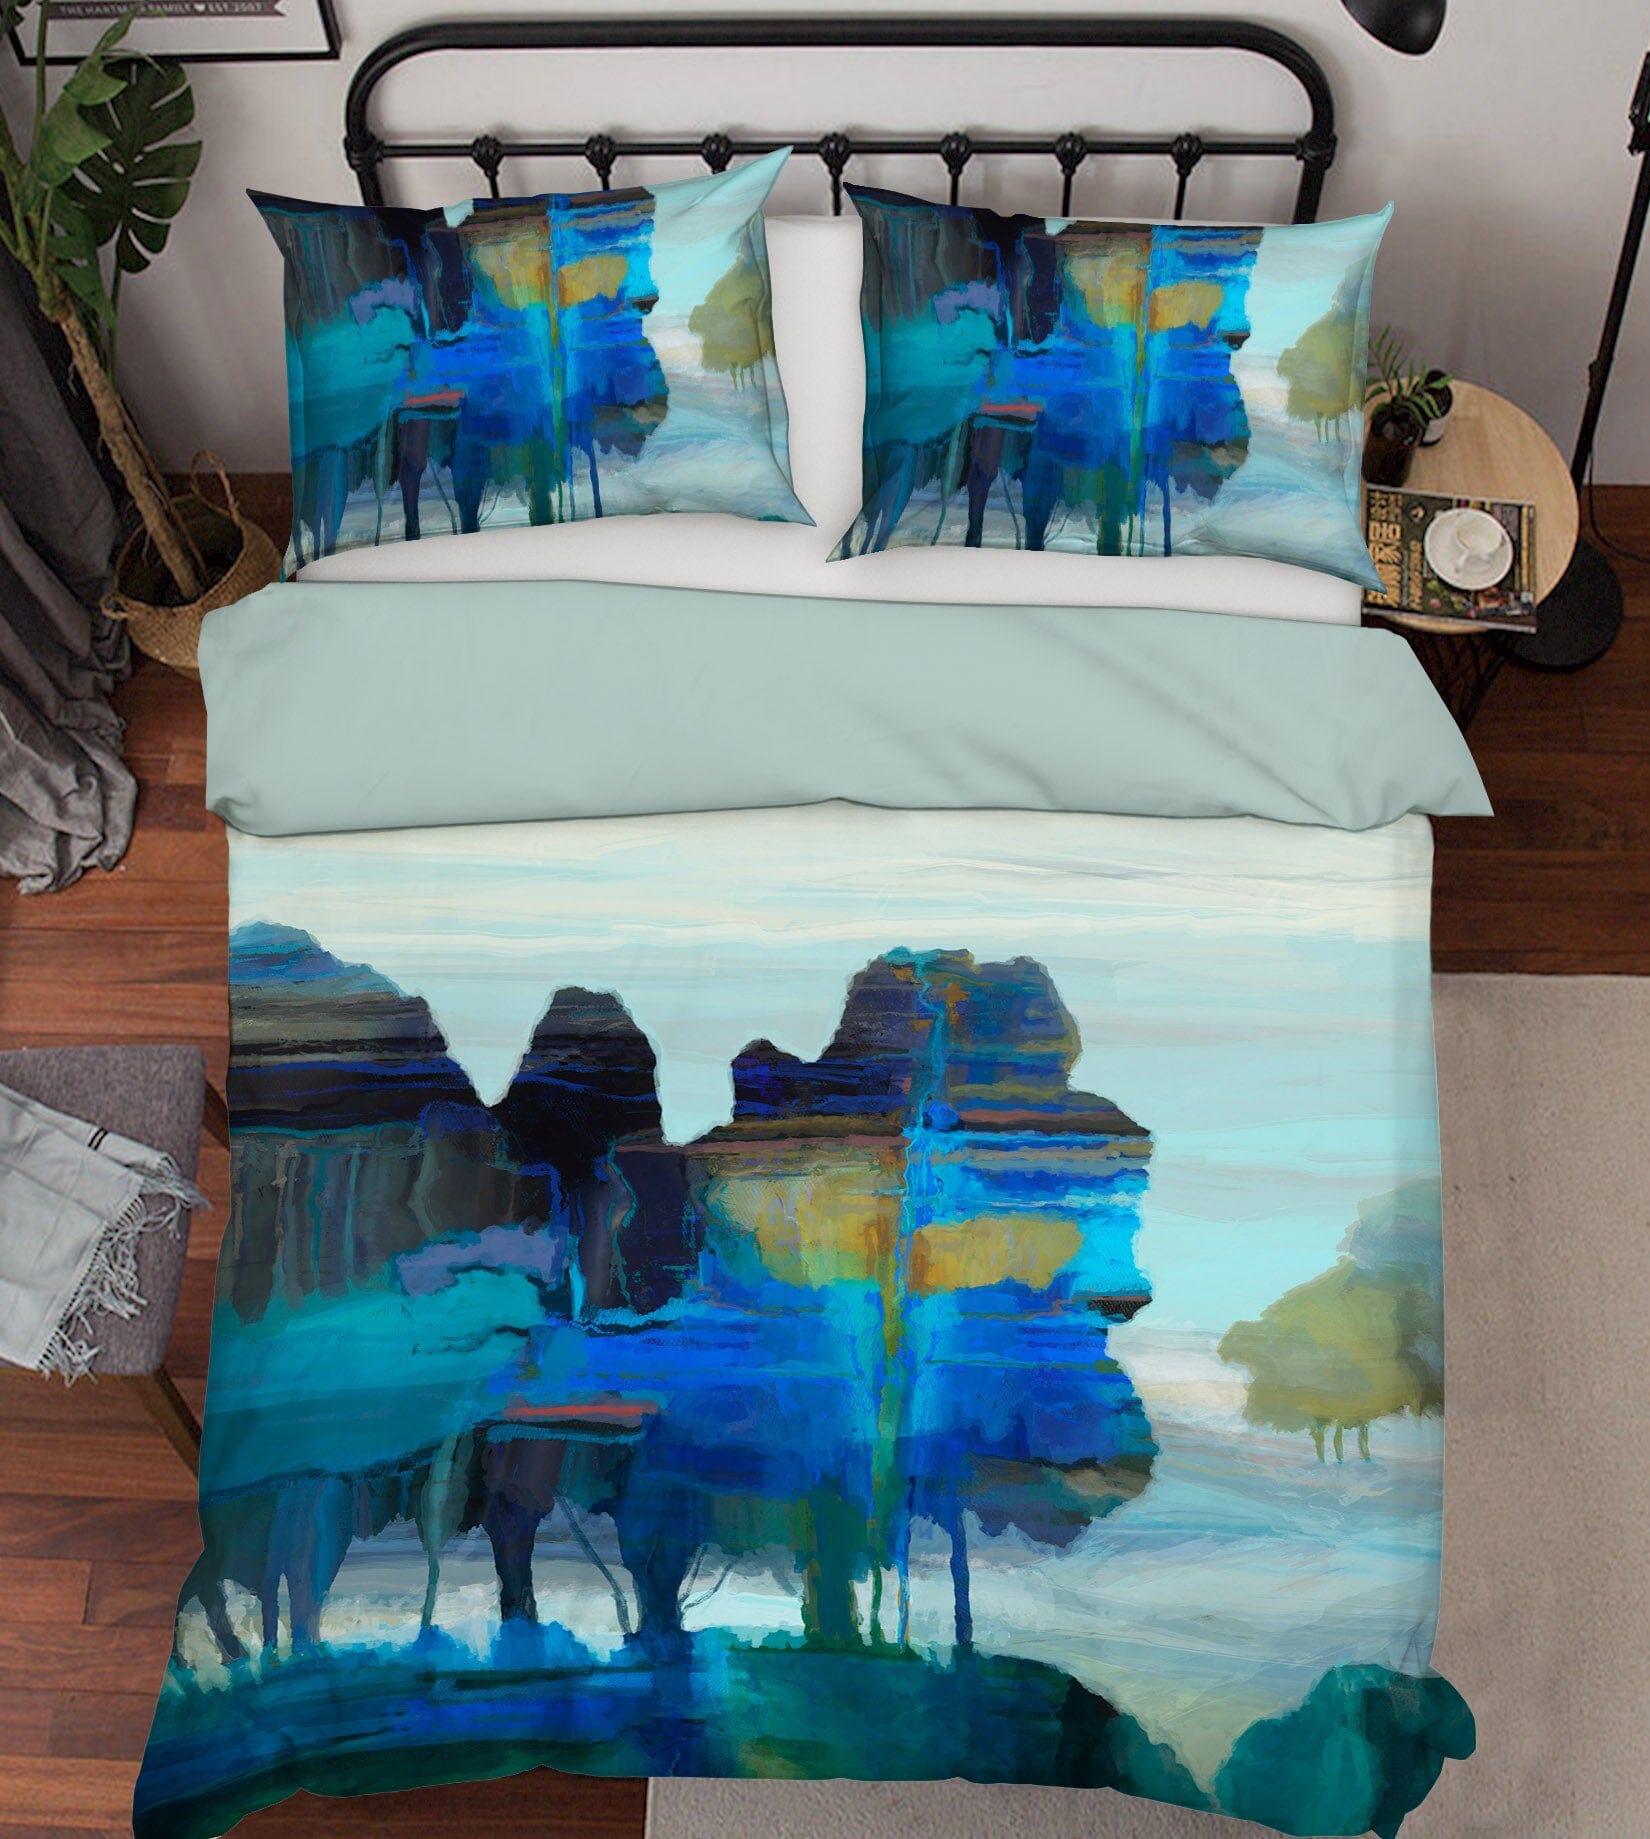 3D Mountain River 2128 Michael Tienhaara Bedding Bed Pillowcases Quilt Quiet Covers AJ Creativity Home 